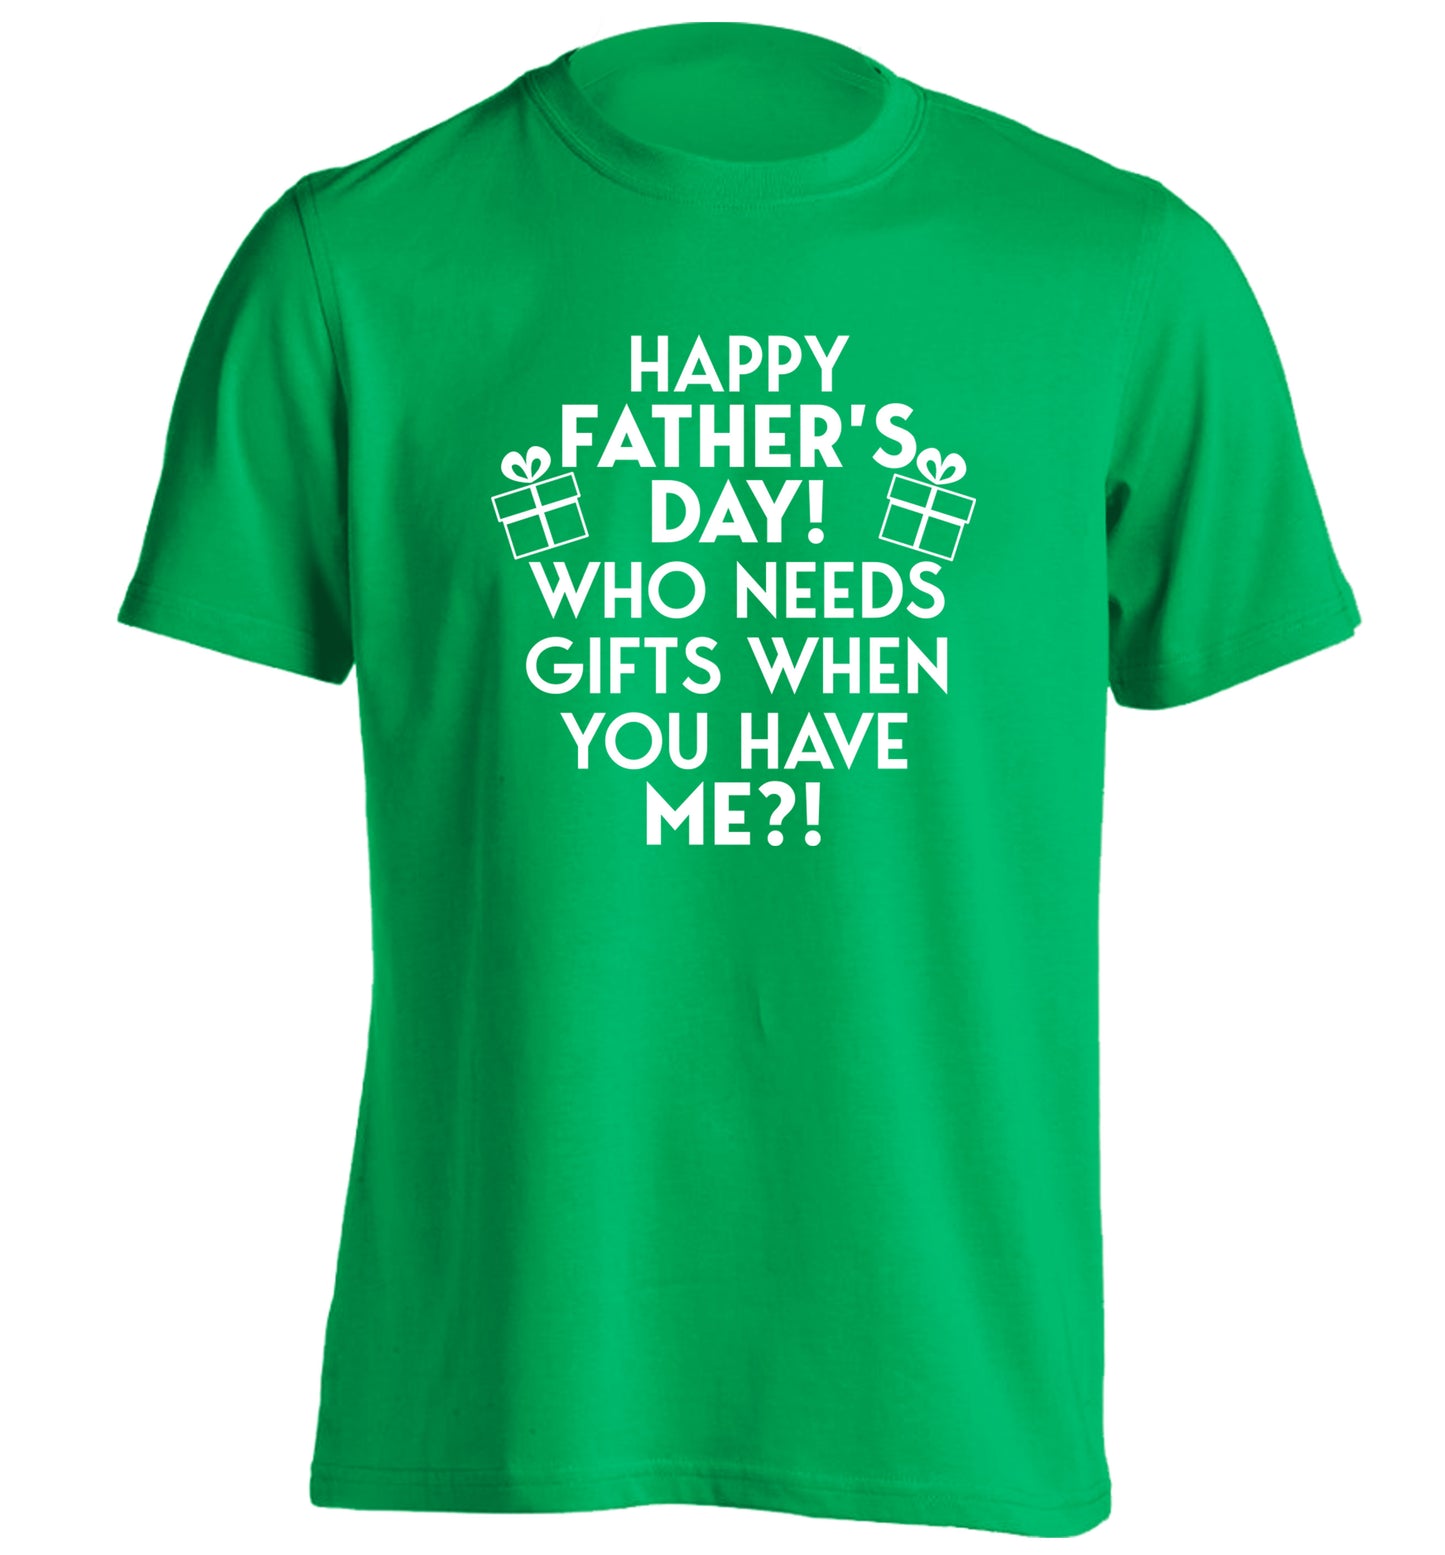 Happy Father's day, who needs a present when you have me adults unisex green Tshirt 2XL